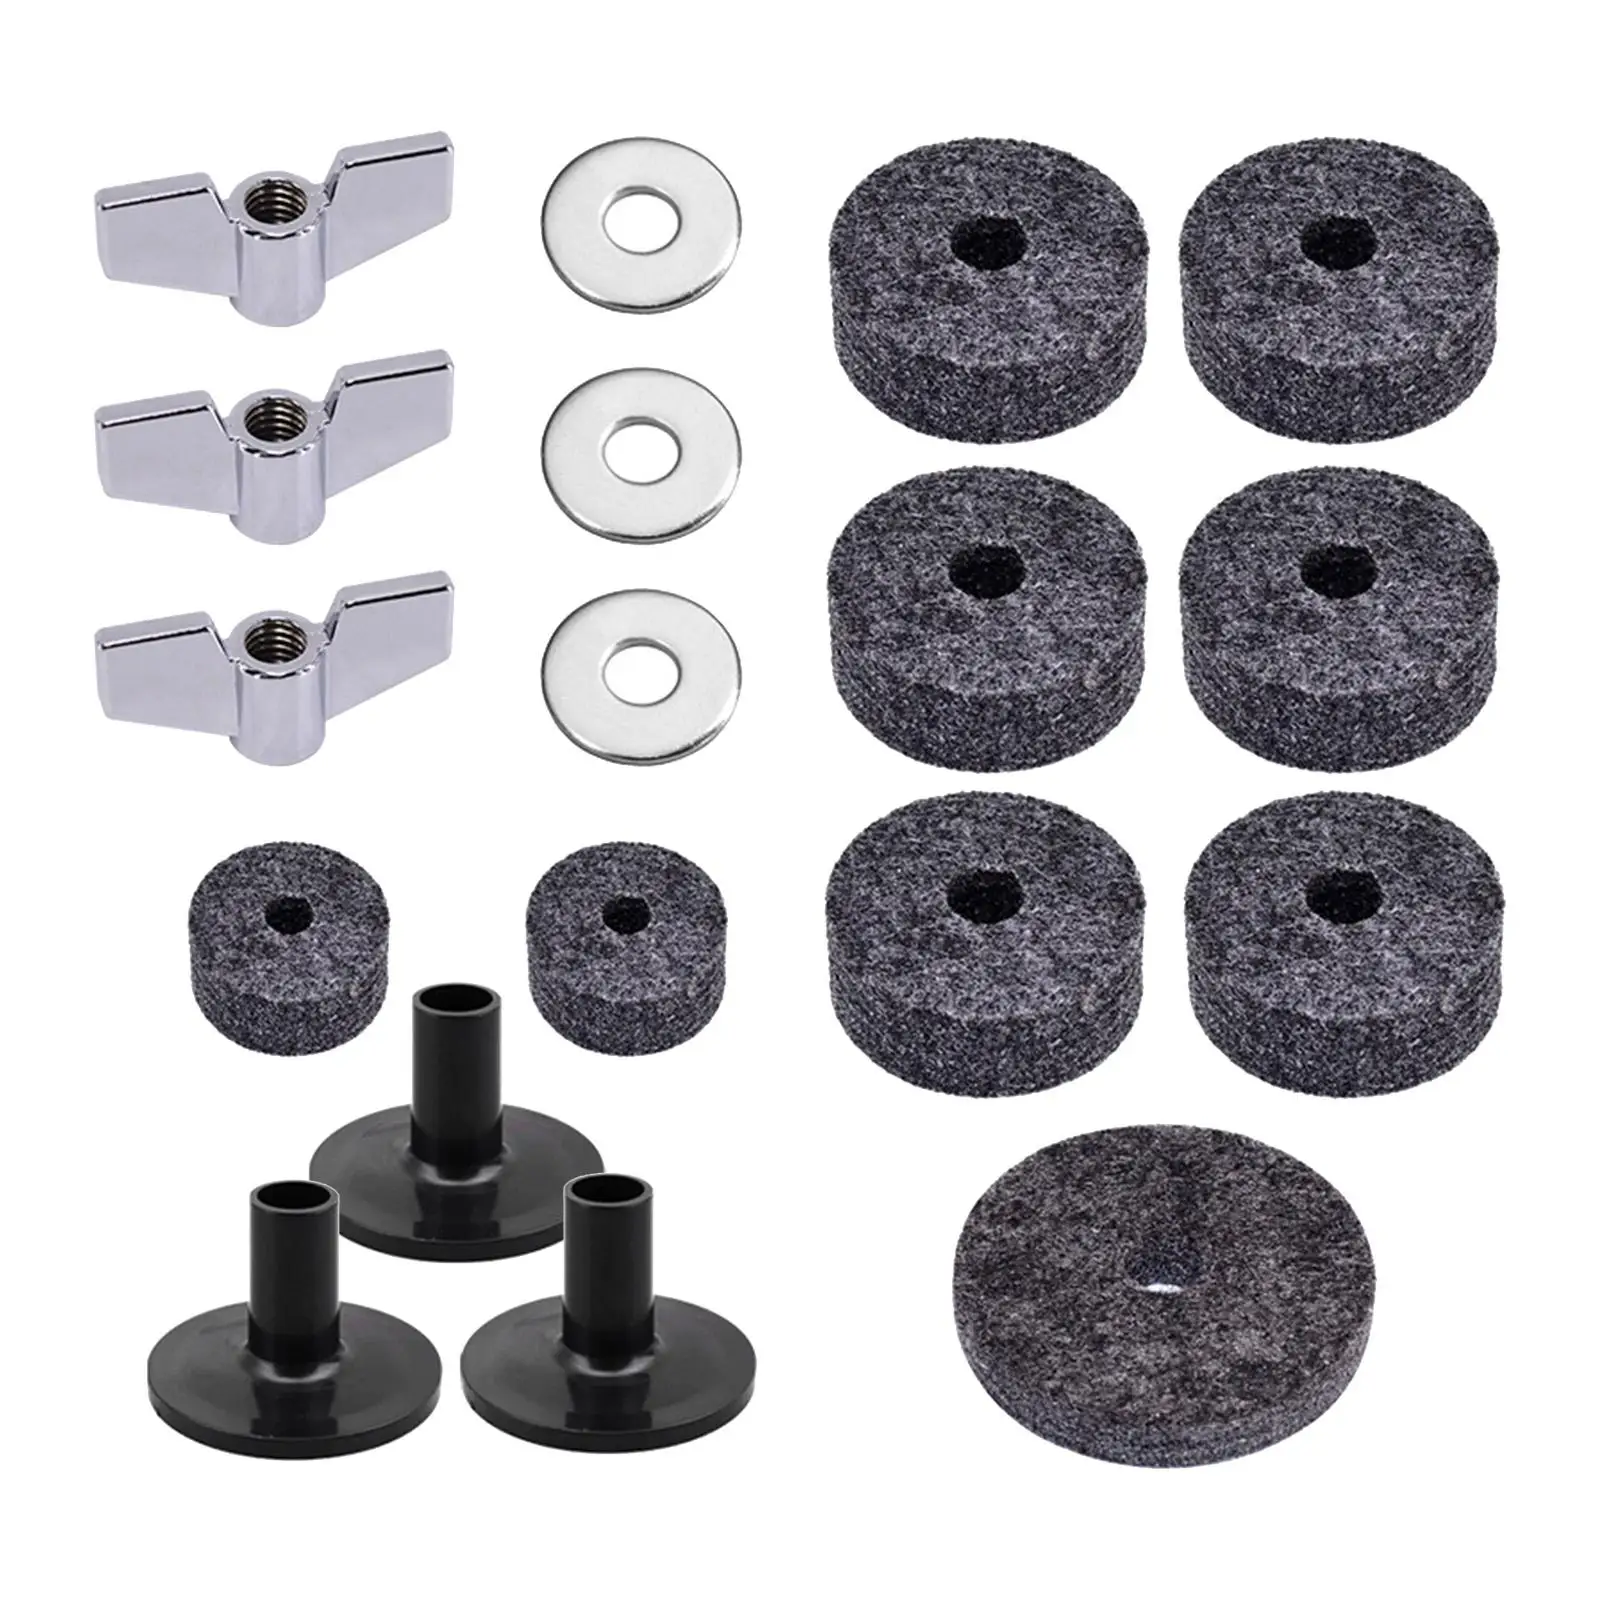 Drum Replacement Parts, Cymbal Felts Washers Percussion Instruments, Wing Nuts, Musical Accessories, Attachment for Musician